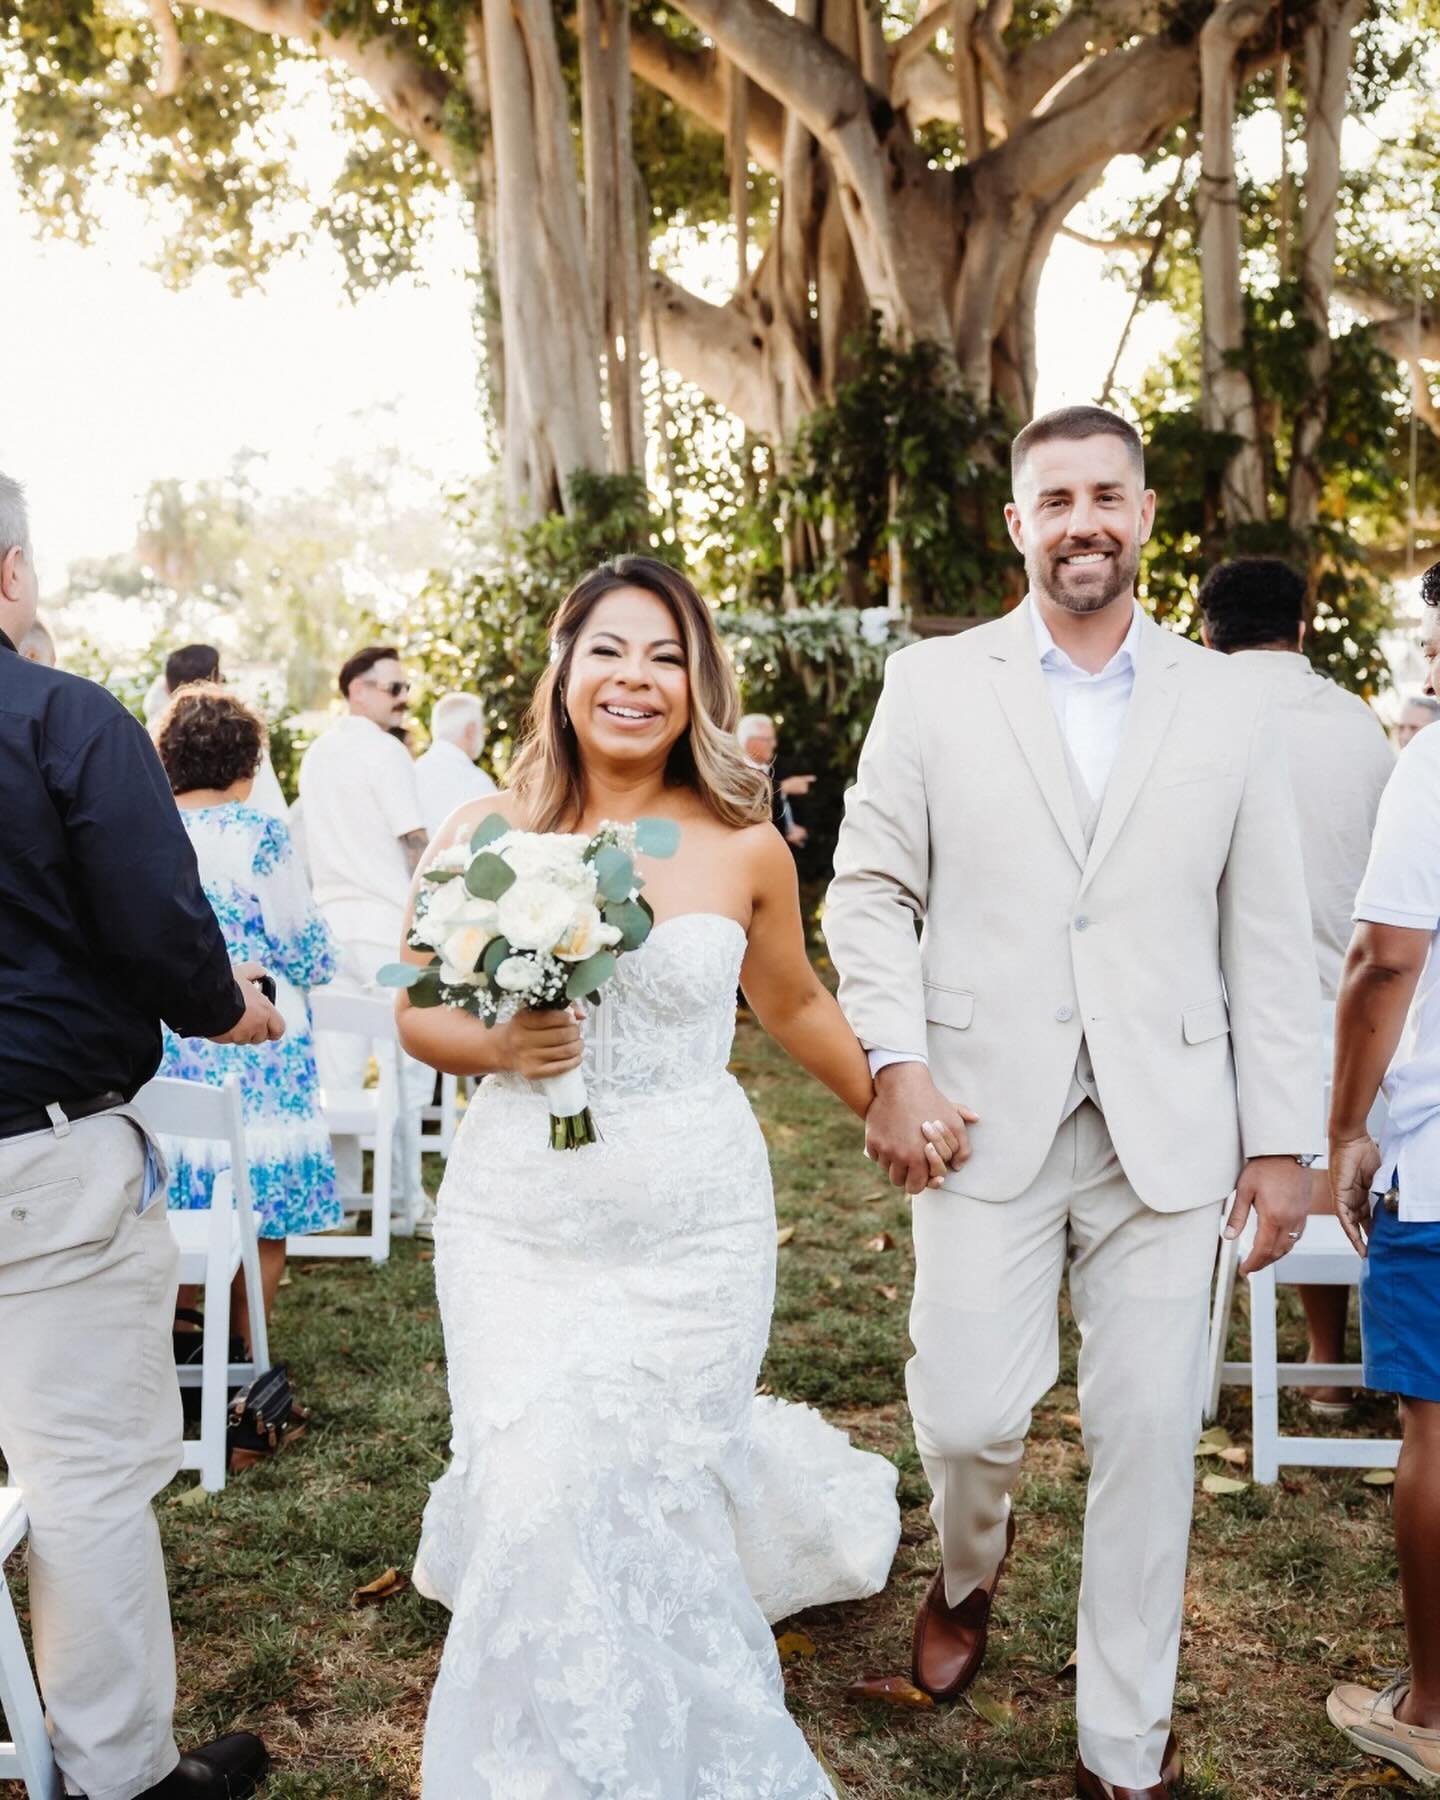 The Pizarro &amp; Hopkins crew joined forced last weekend! I&rsquo;m just thrilled to have been apart of it all! 

Congratulations to Maria &amp; Aaron! 

Venue: @thetreehouseswfl 
Photo: @allisonunionphoto 
Make-up Artist: @alexisleighartistry 
DJ: 